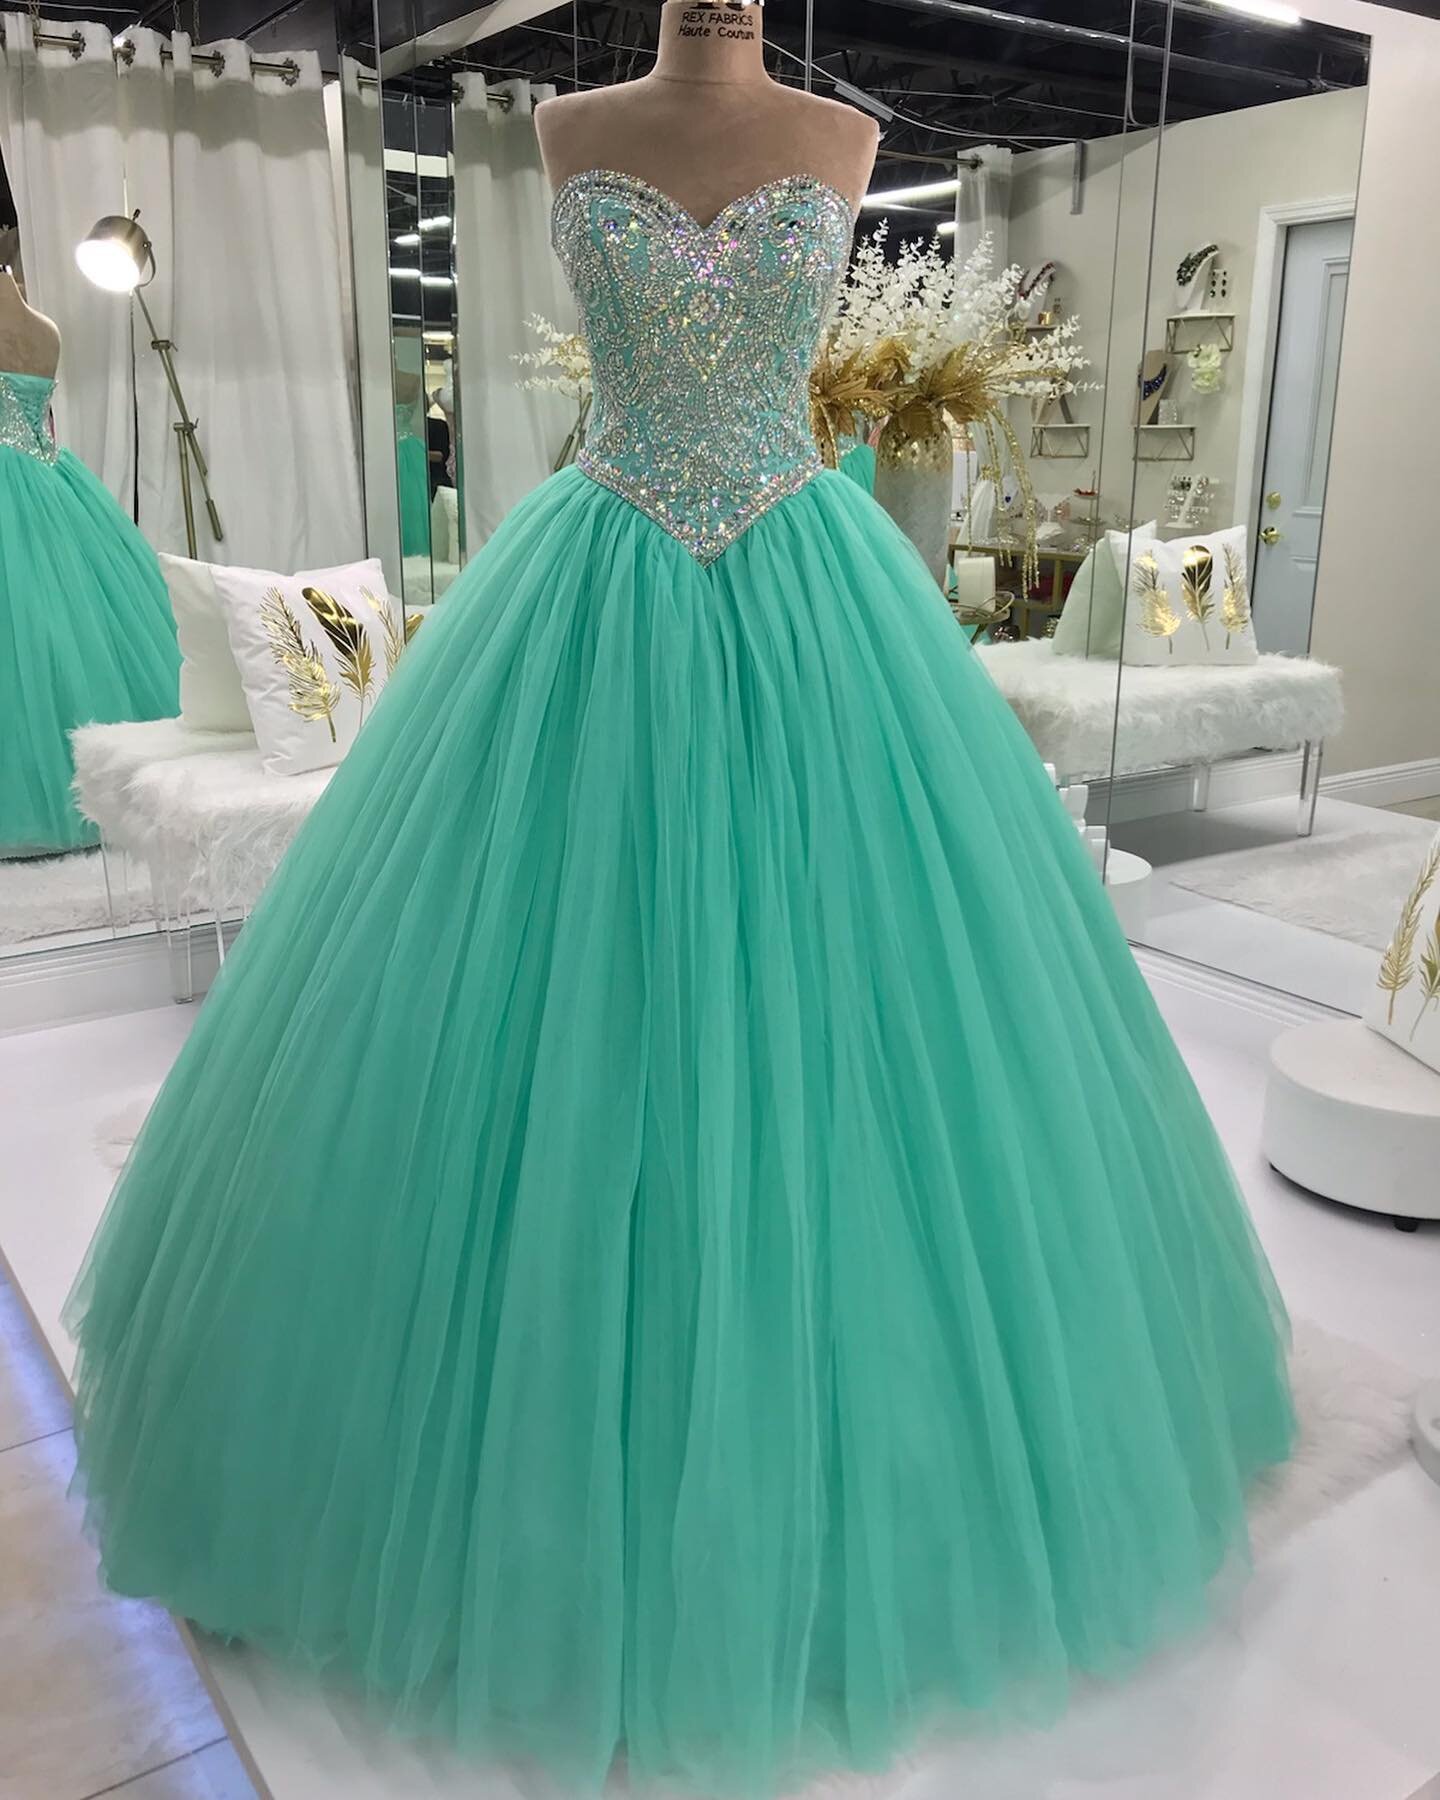 gorgeousss teal color on this gown 🤩
&bull;
&bull;
&bull;
&bull;

#quince#quinceañeramiami #quinceañera #quincedress #miami#miamidresses #miamidressrental#southflorida #dresses #gowns #dressrental #quinceañeras #quinceaños #quinceañeraphotograp